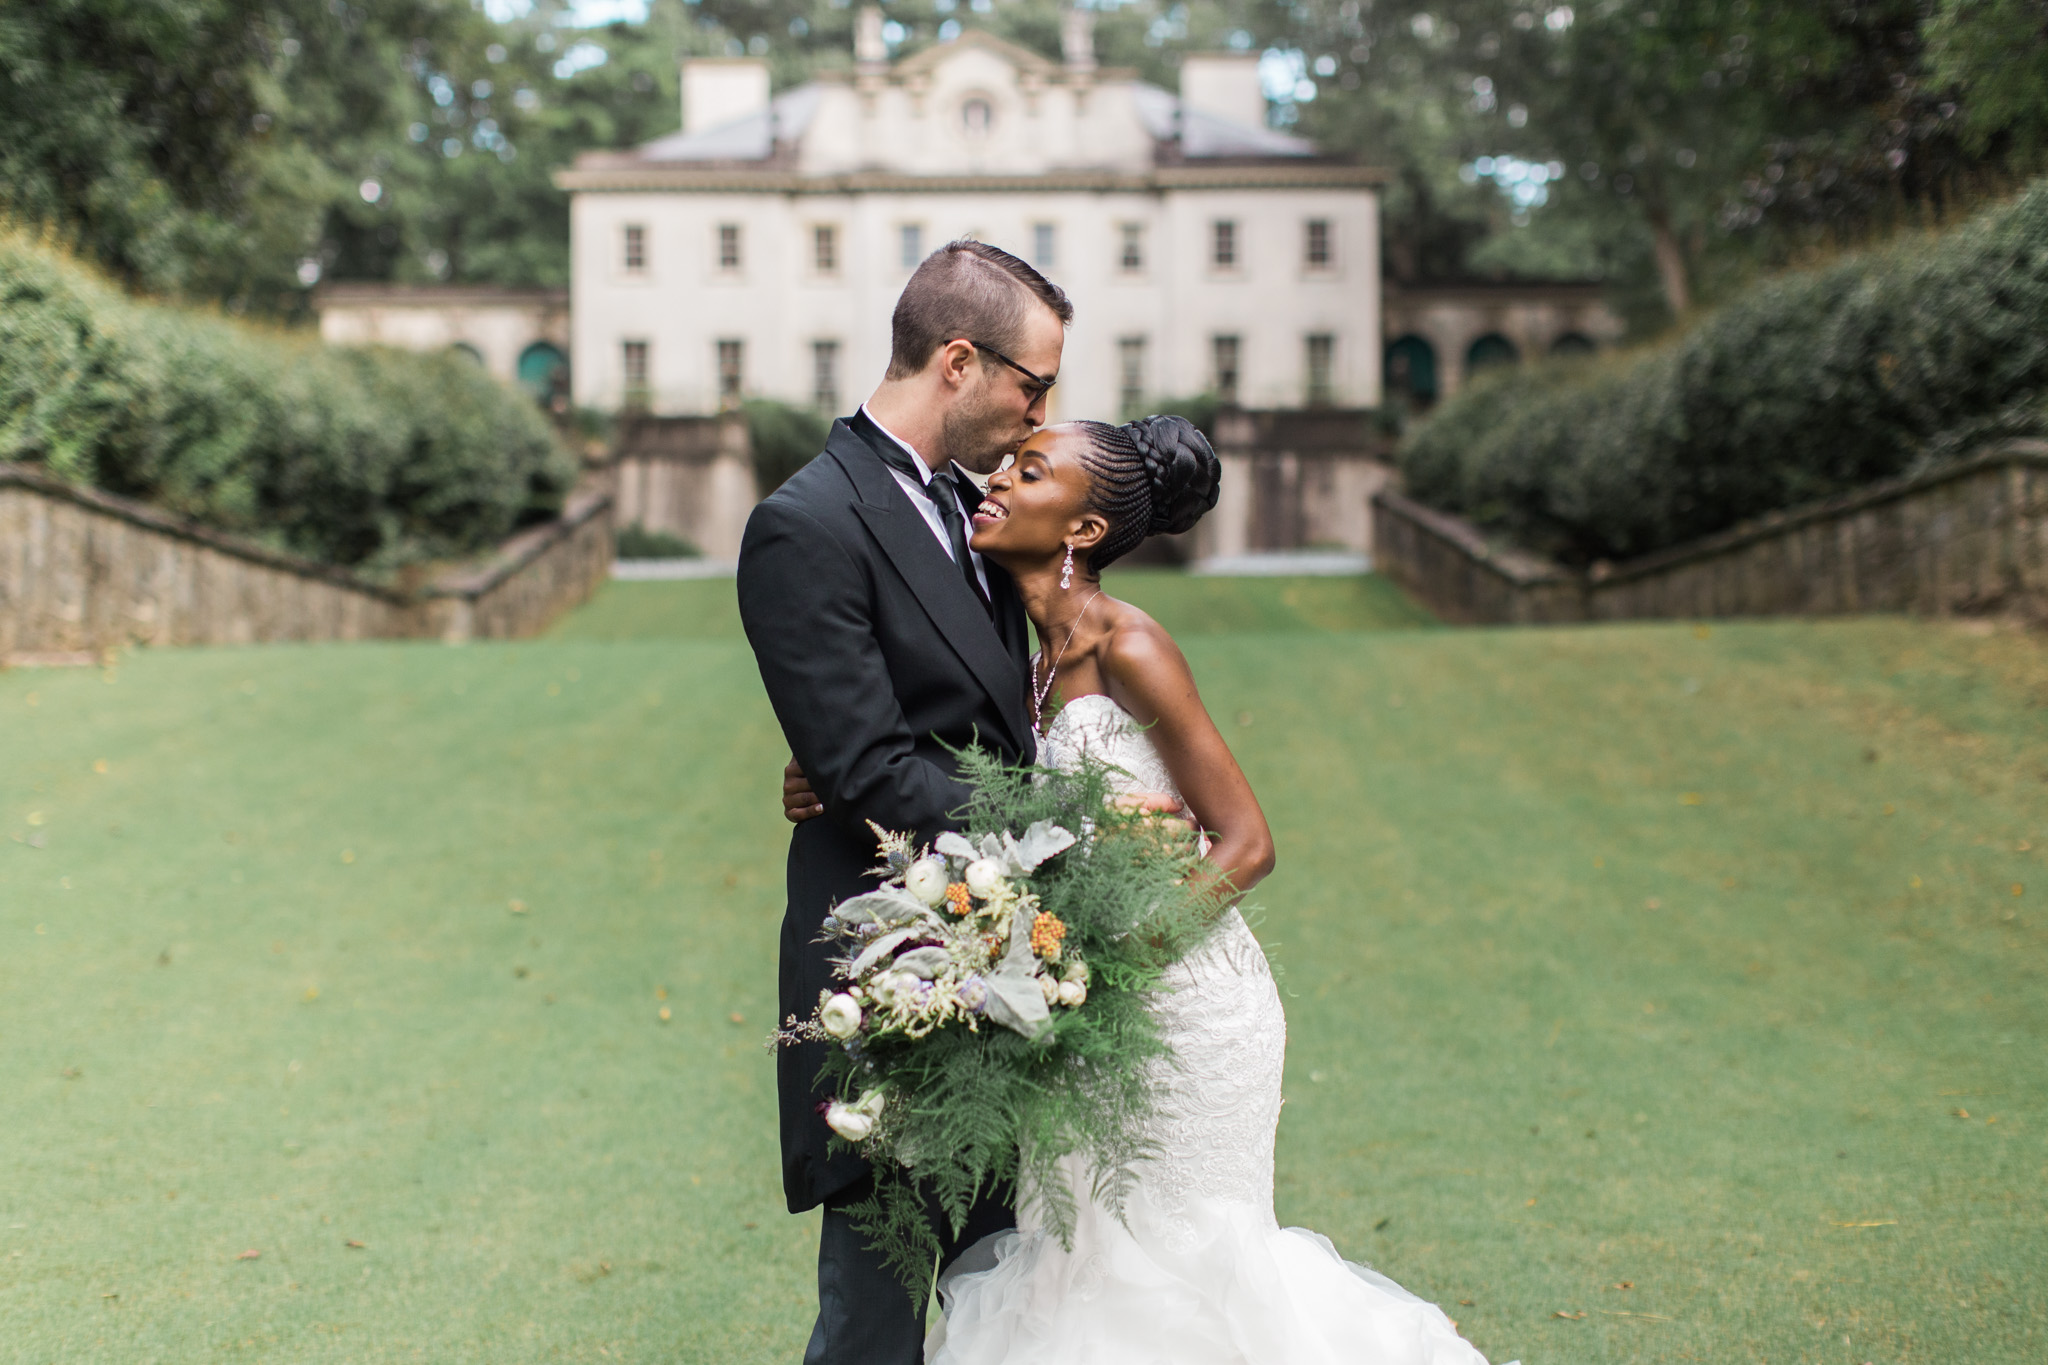 Capturing candid emotions at the Swan House is something that top photographer Rebecca Cerasani loves to do.